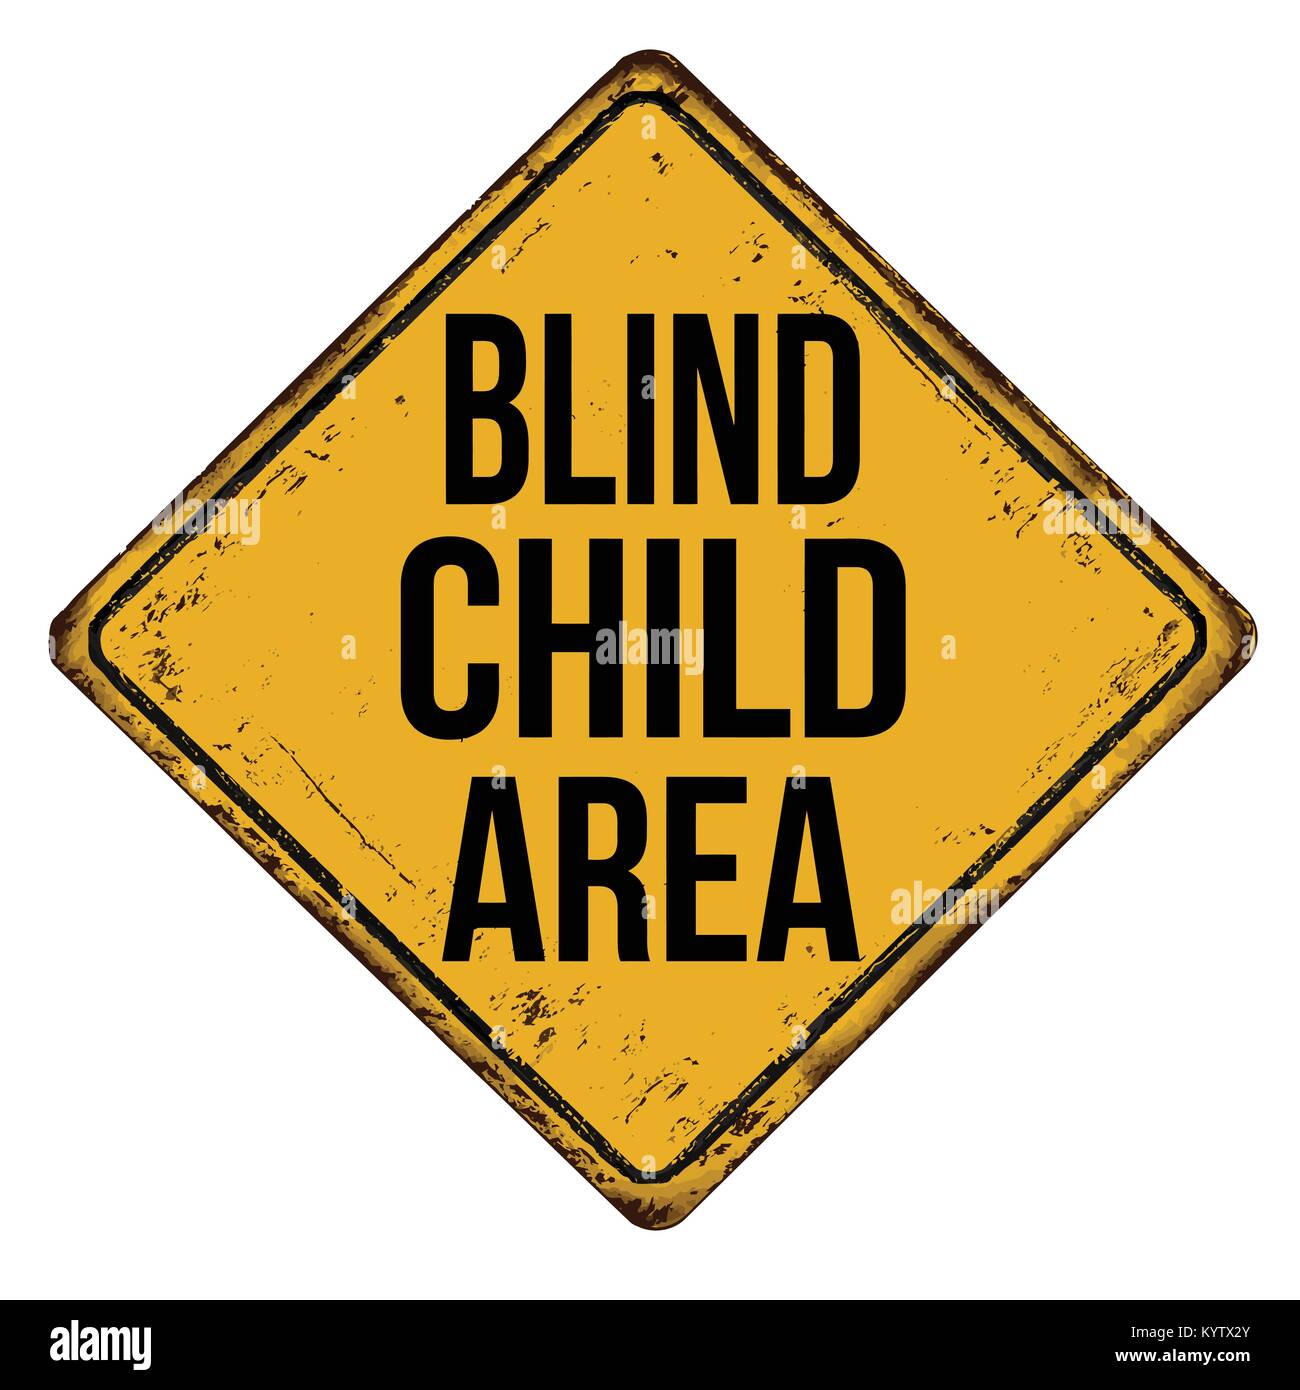 Blind child area vintage rusty metal sign on a white background, vector illustration Stock Vector